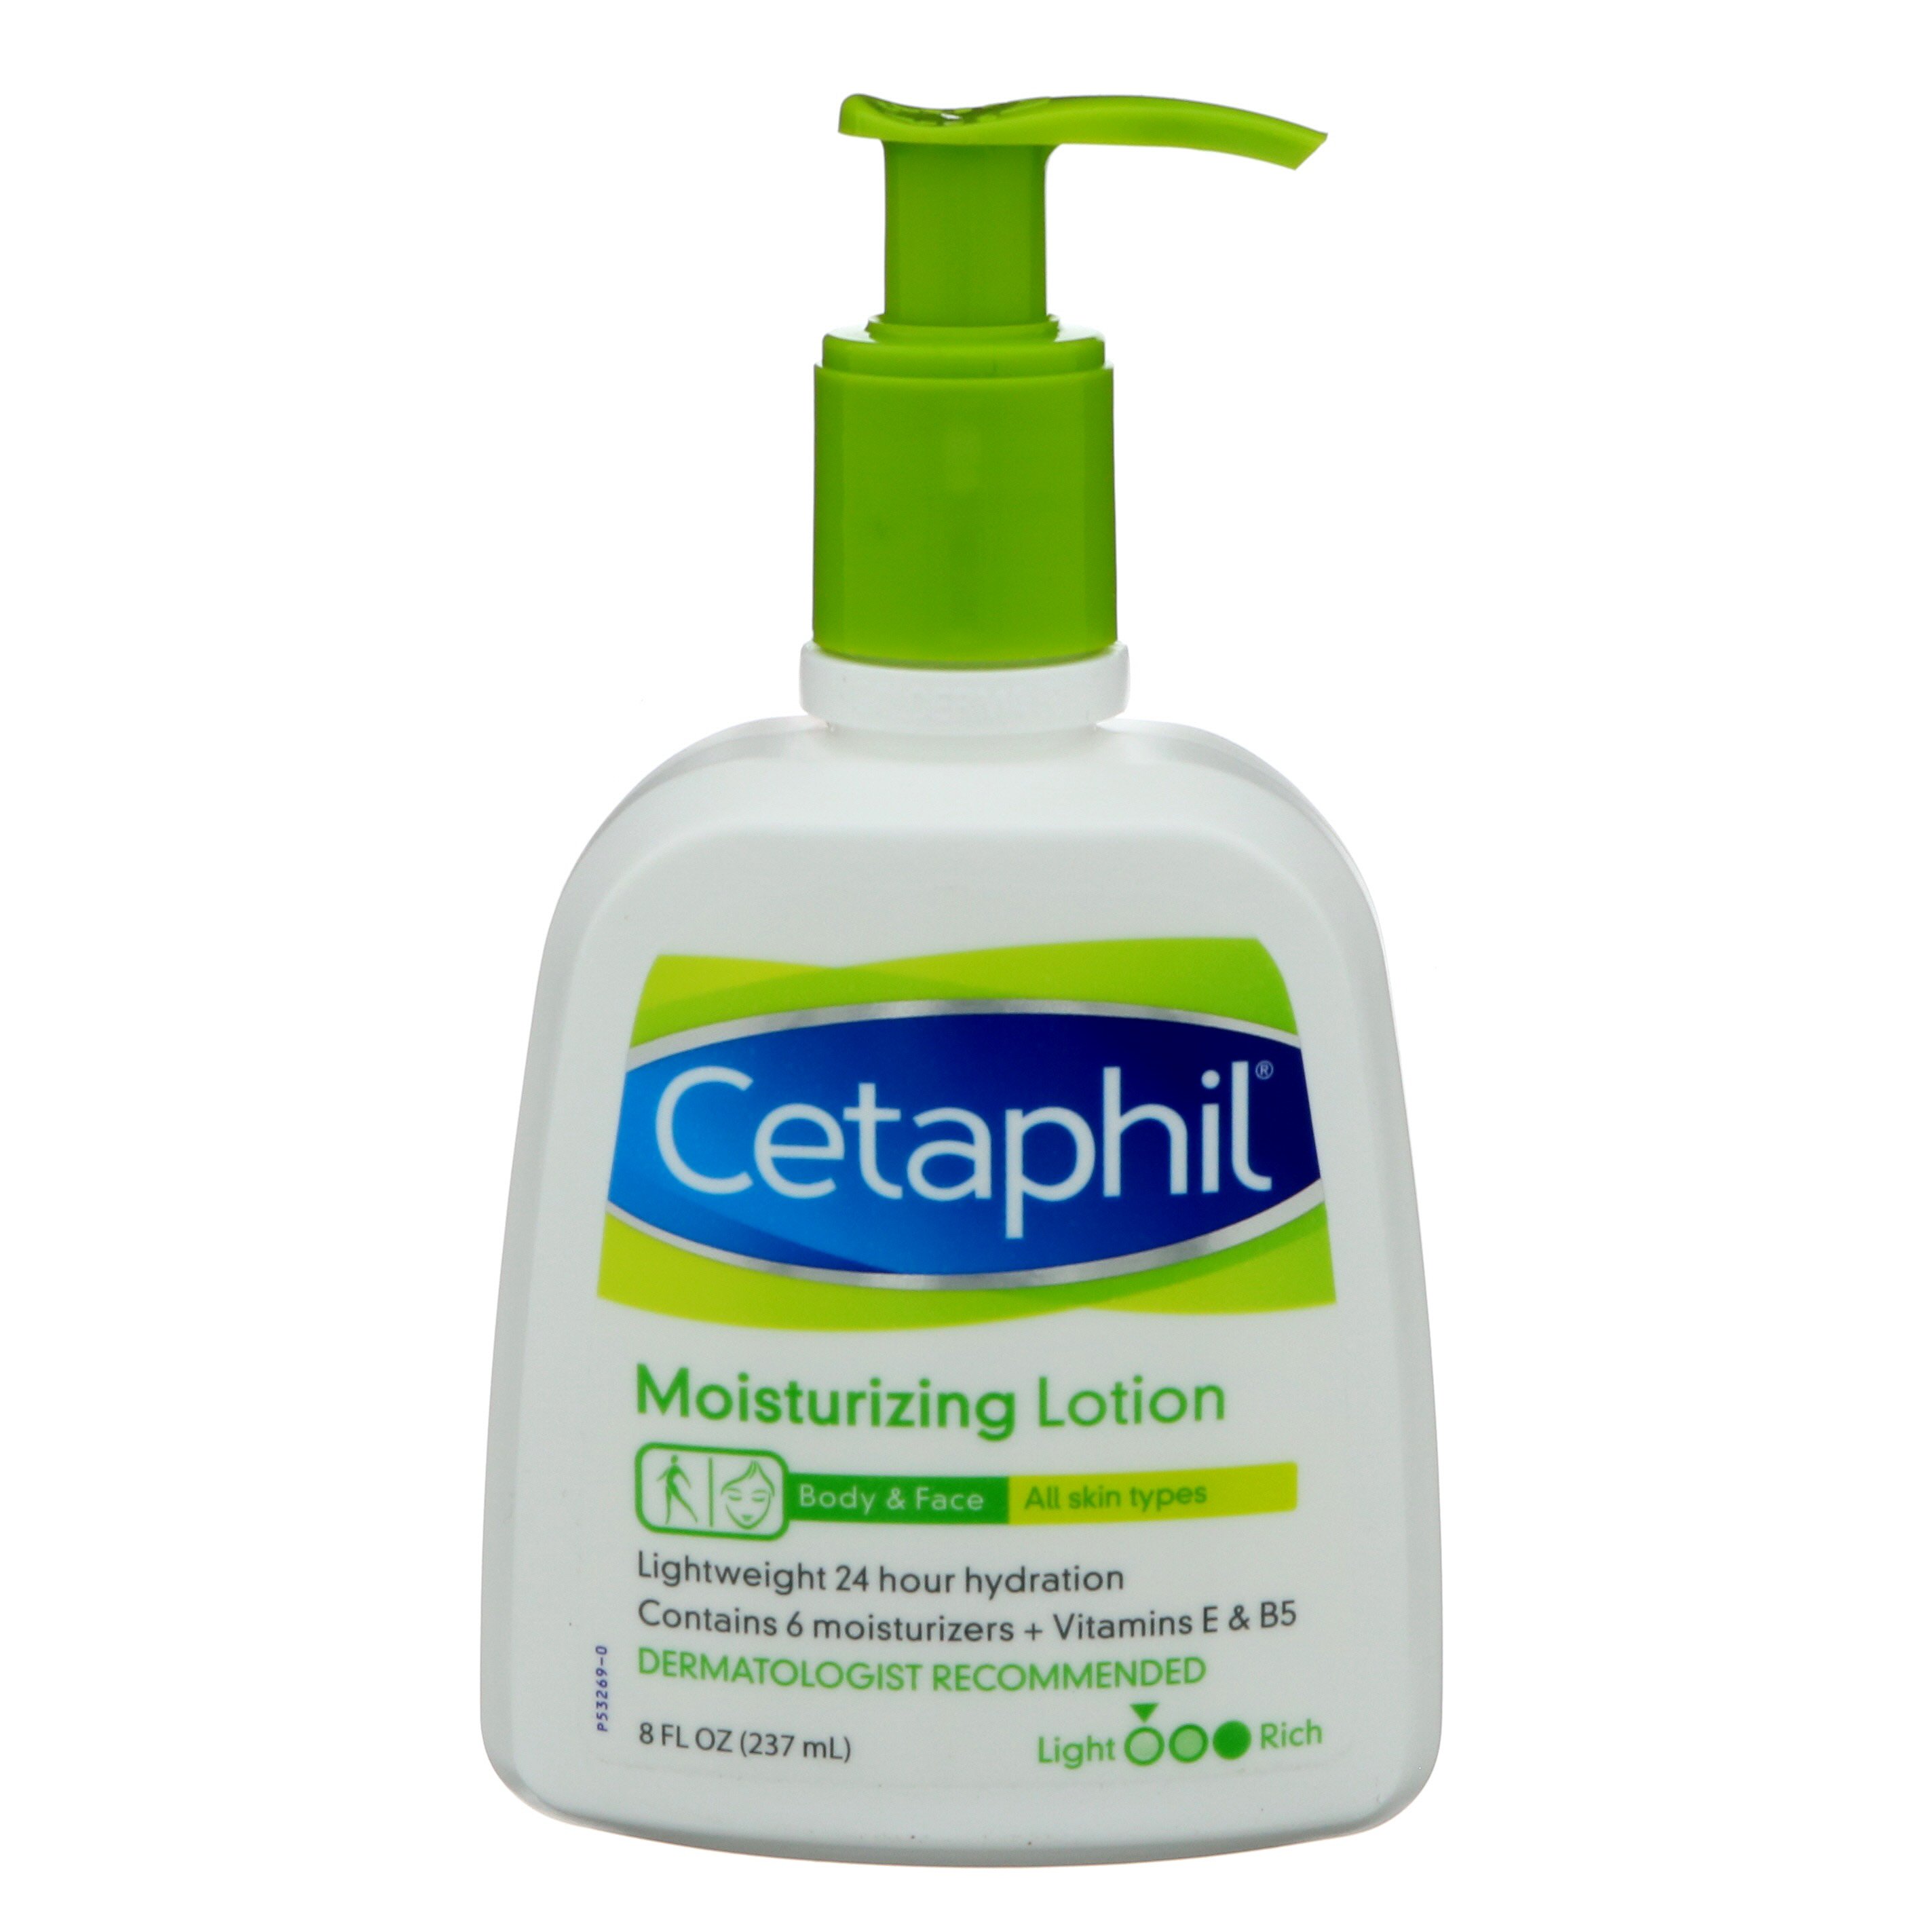 Cetaphil Moisturizing Lotion For All Skin Types - Shop Moisturizers at